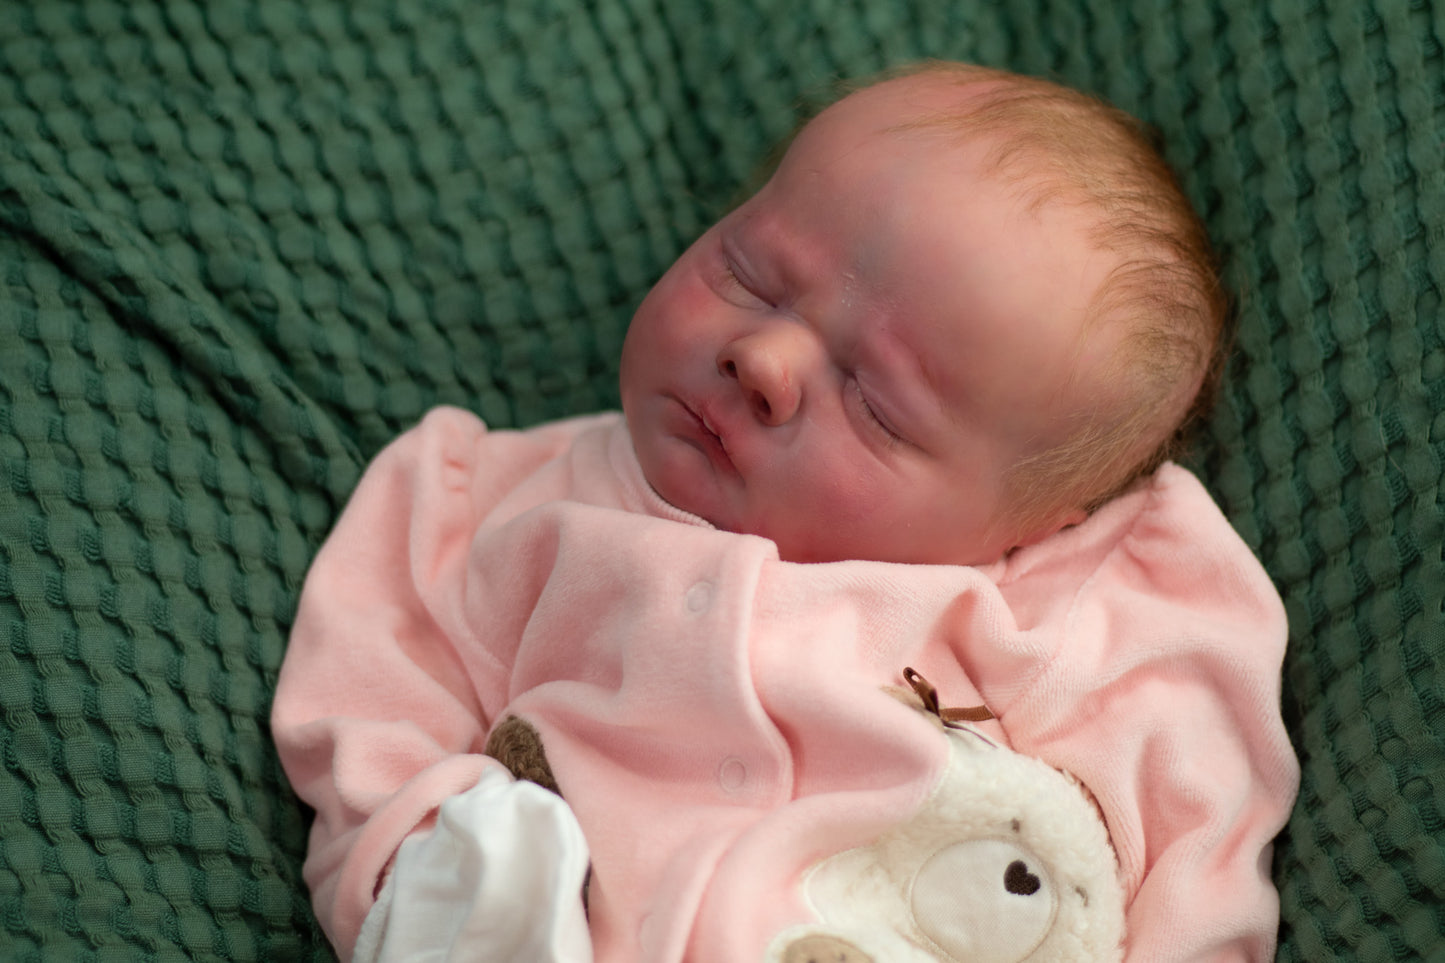 Reborn Cuddle Baby SOLE "Asher" By Bountiful Baby